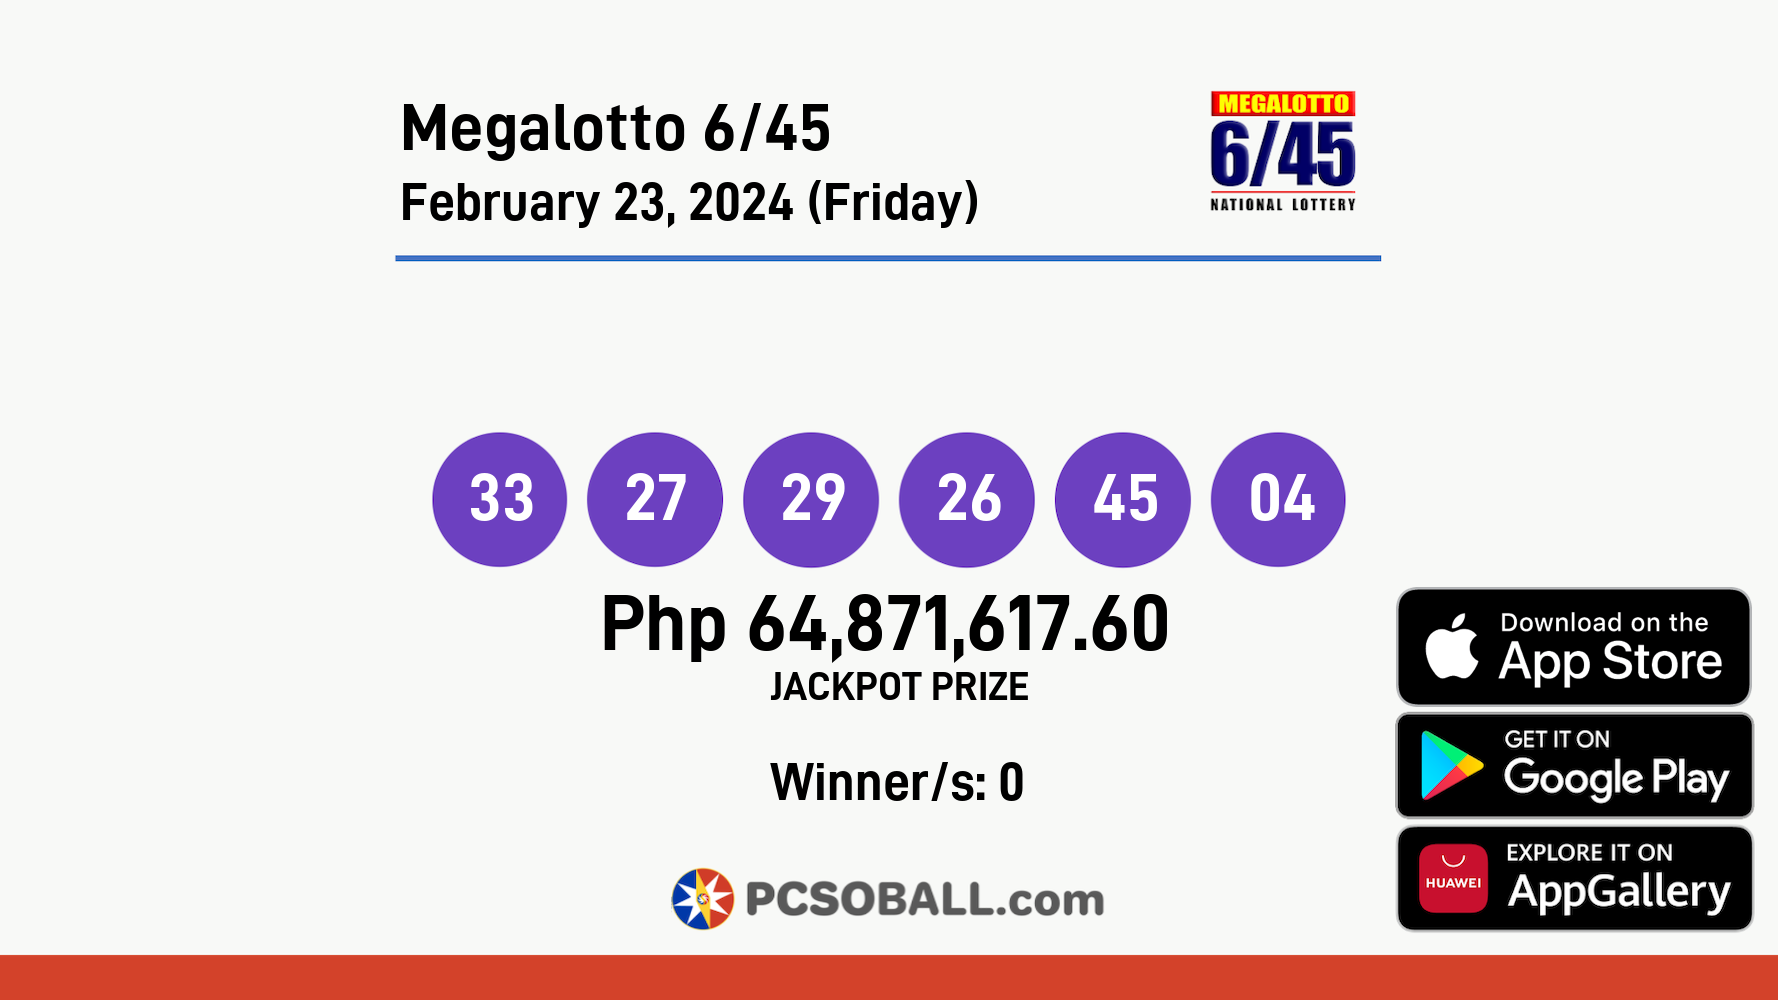 Megalotto 6/45 February 23, 2024 (Friday) Result